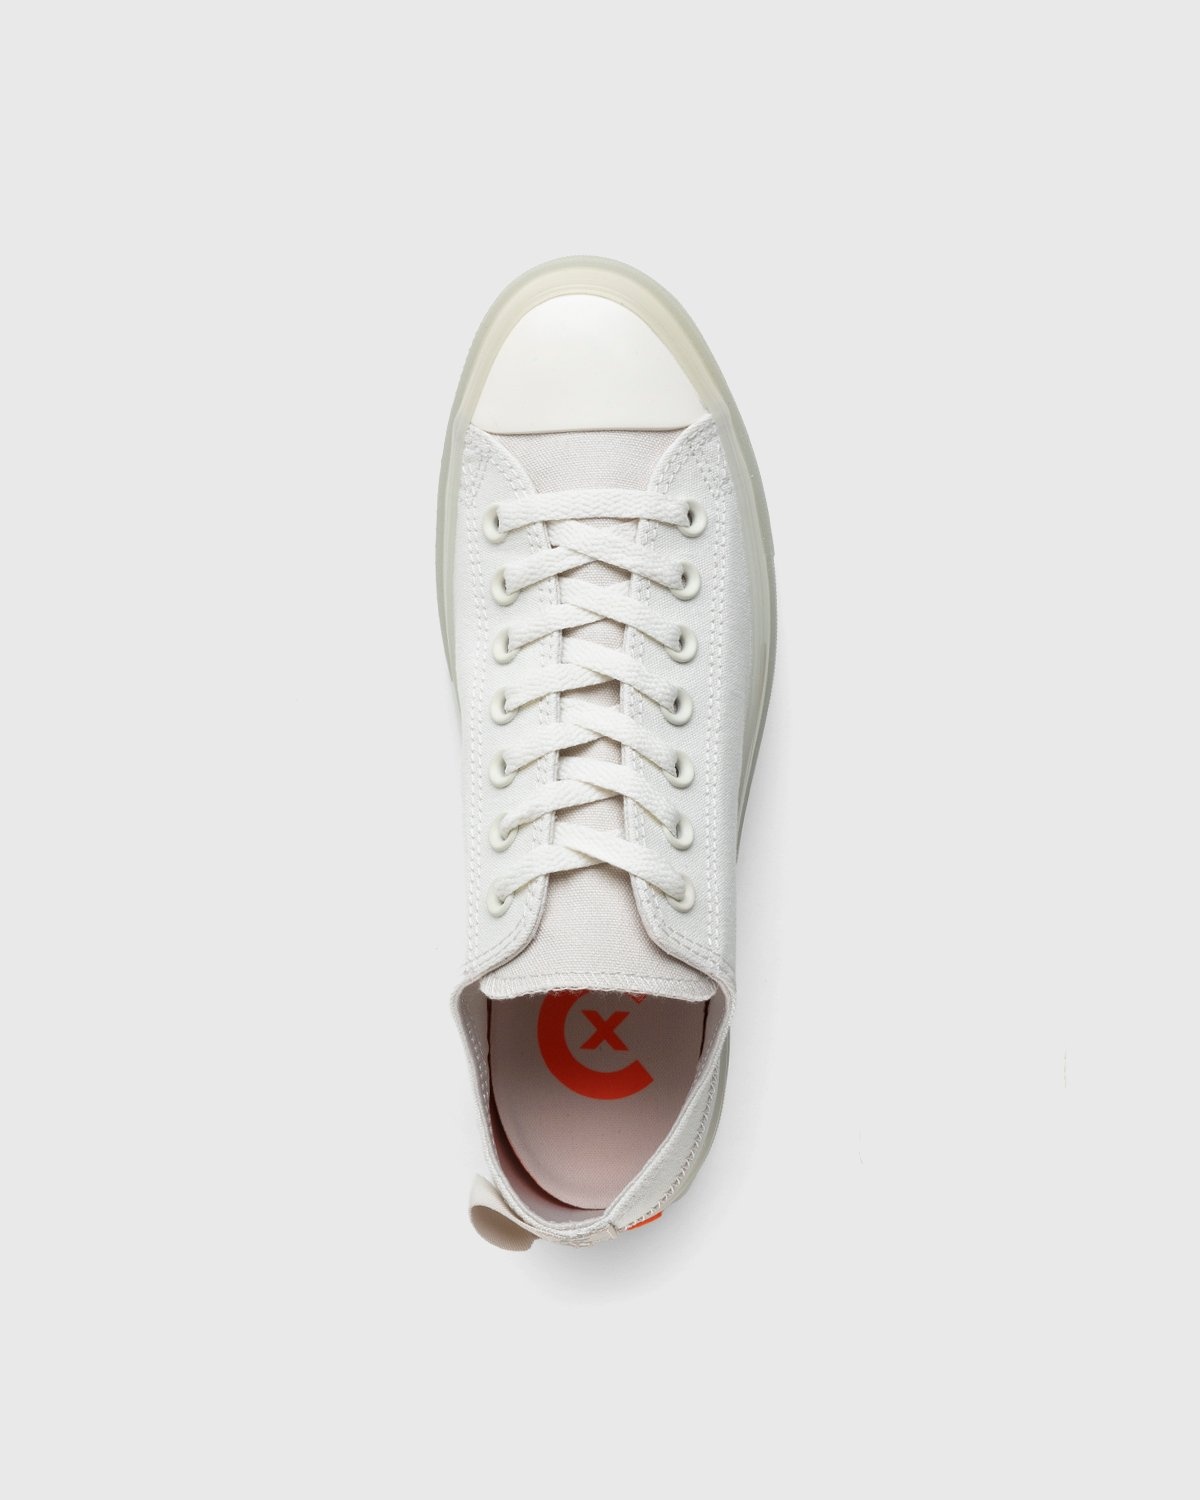 Converse – Chuck Taylor All Star CX Egret/Desert Sand - Sneakers - Grey - Image 5